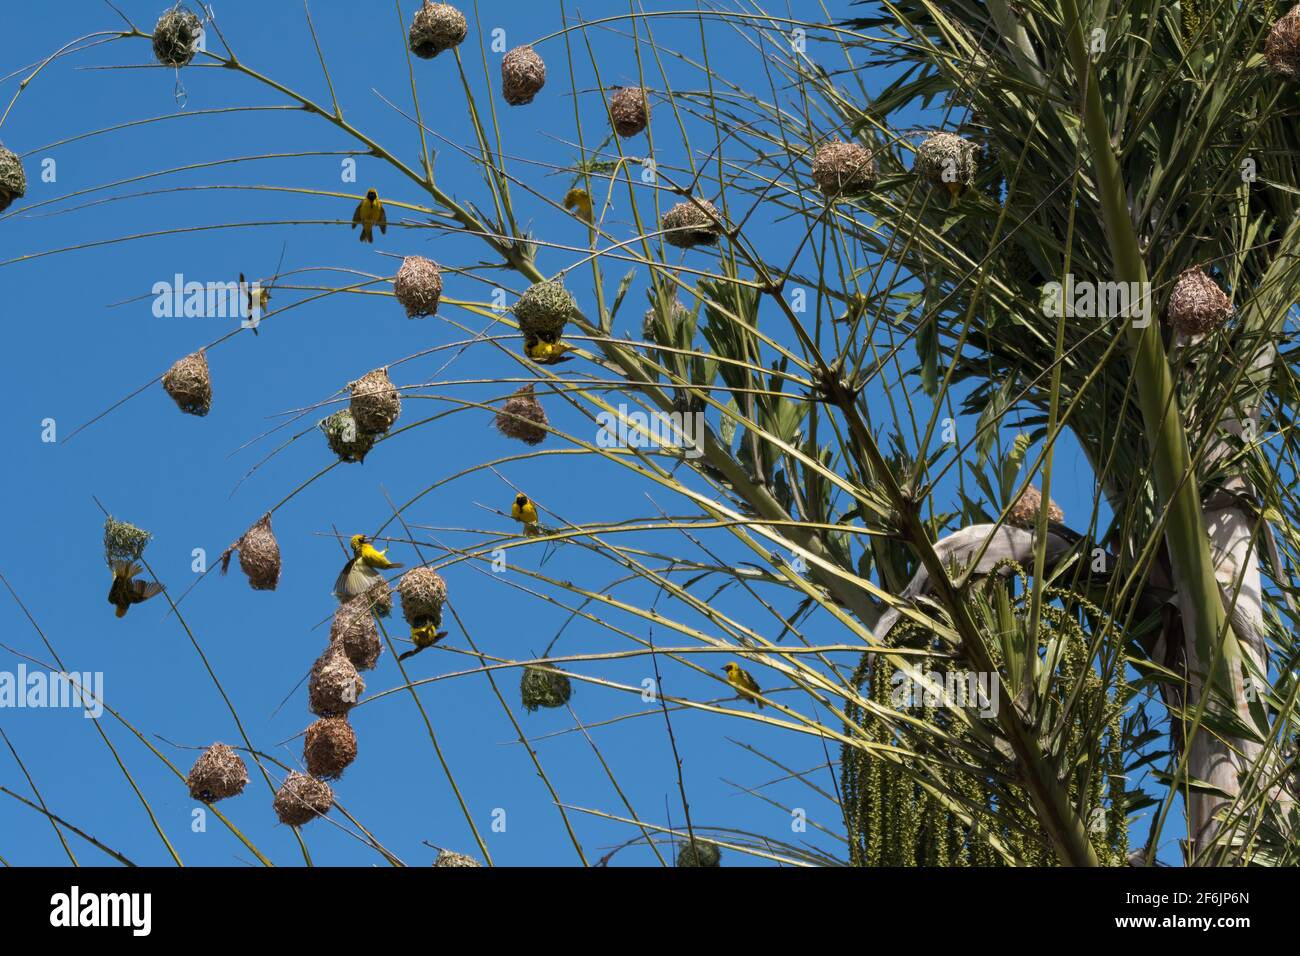 A large colony of Village Weaver (Ploceus cucullatus) nests built high-up on the top fronds of a palm tree in the wild on the island of Mauritius. Stock Photo